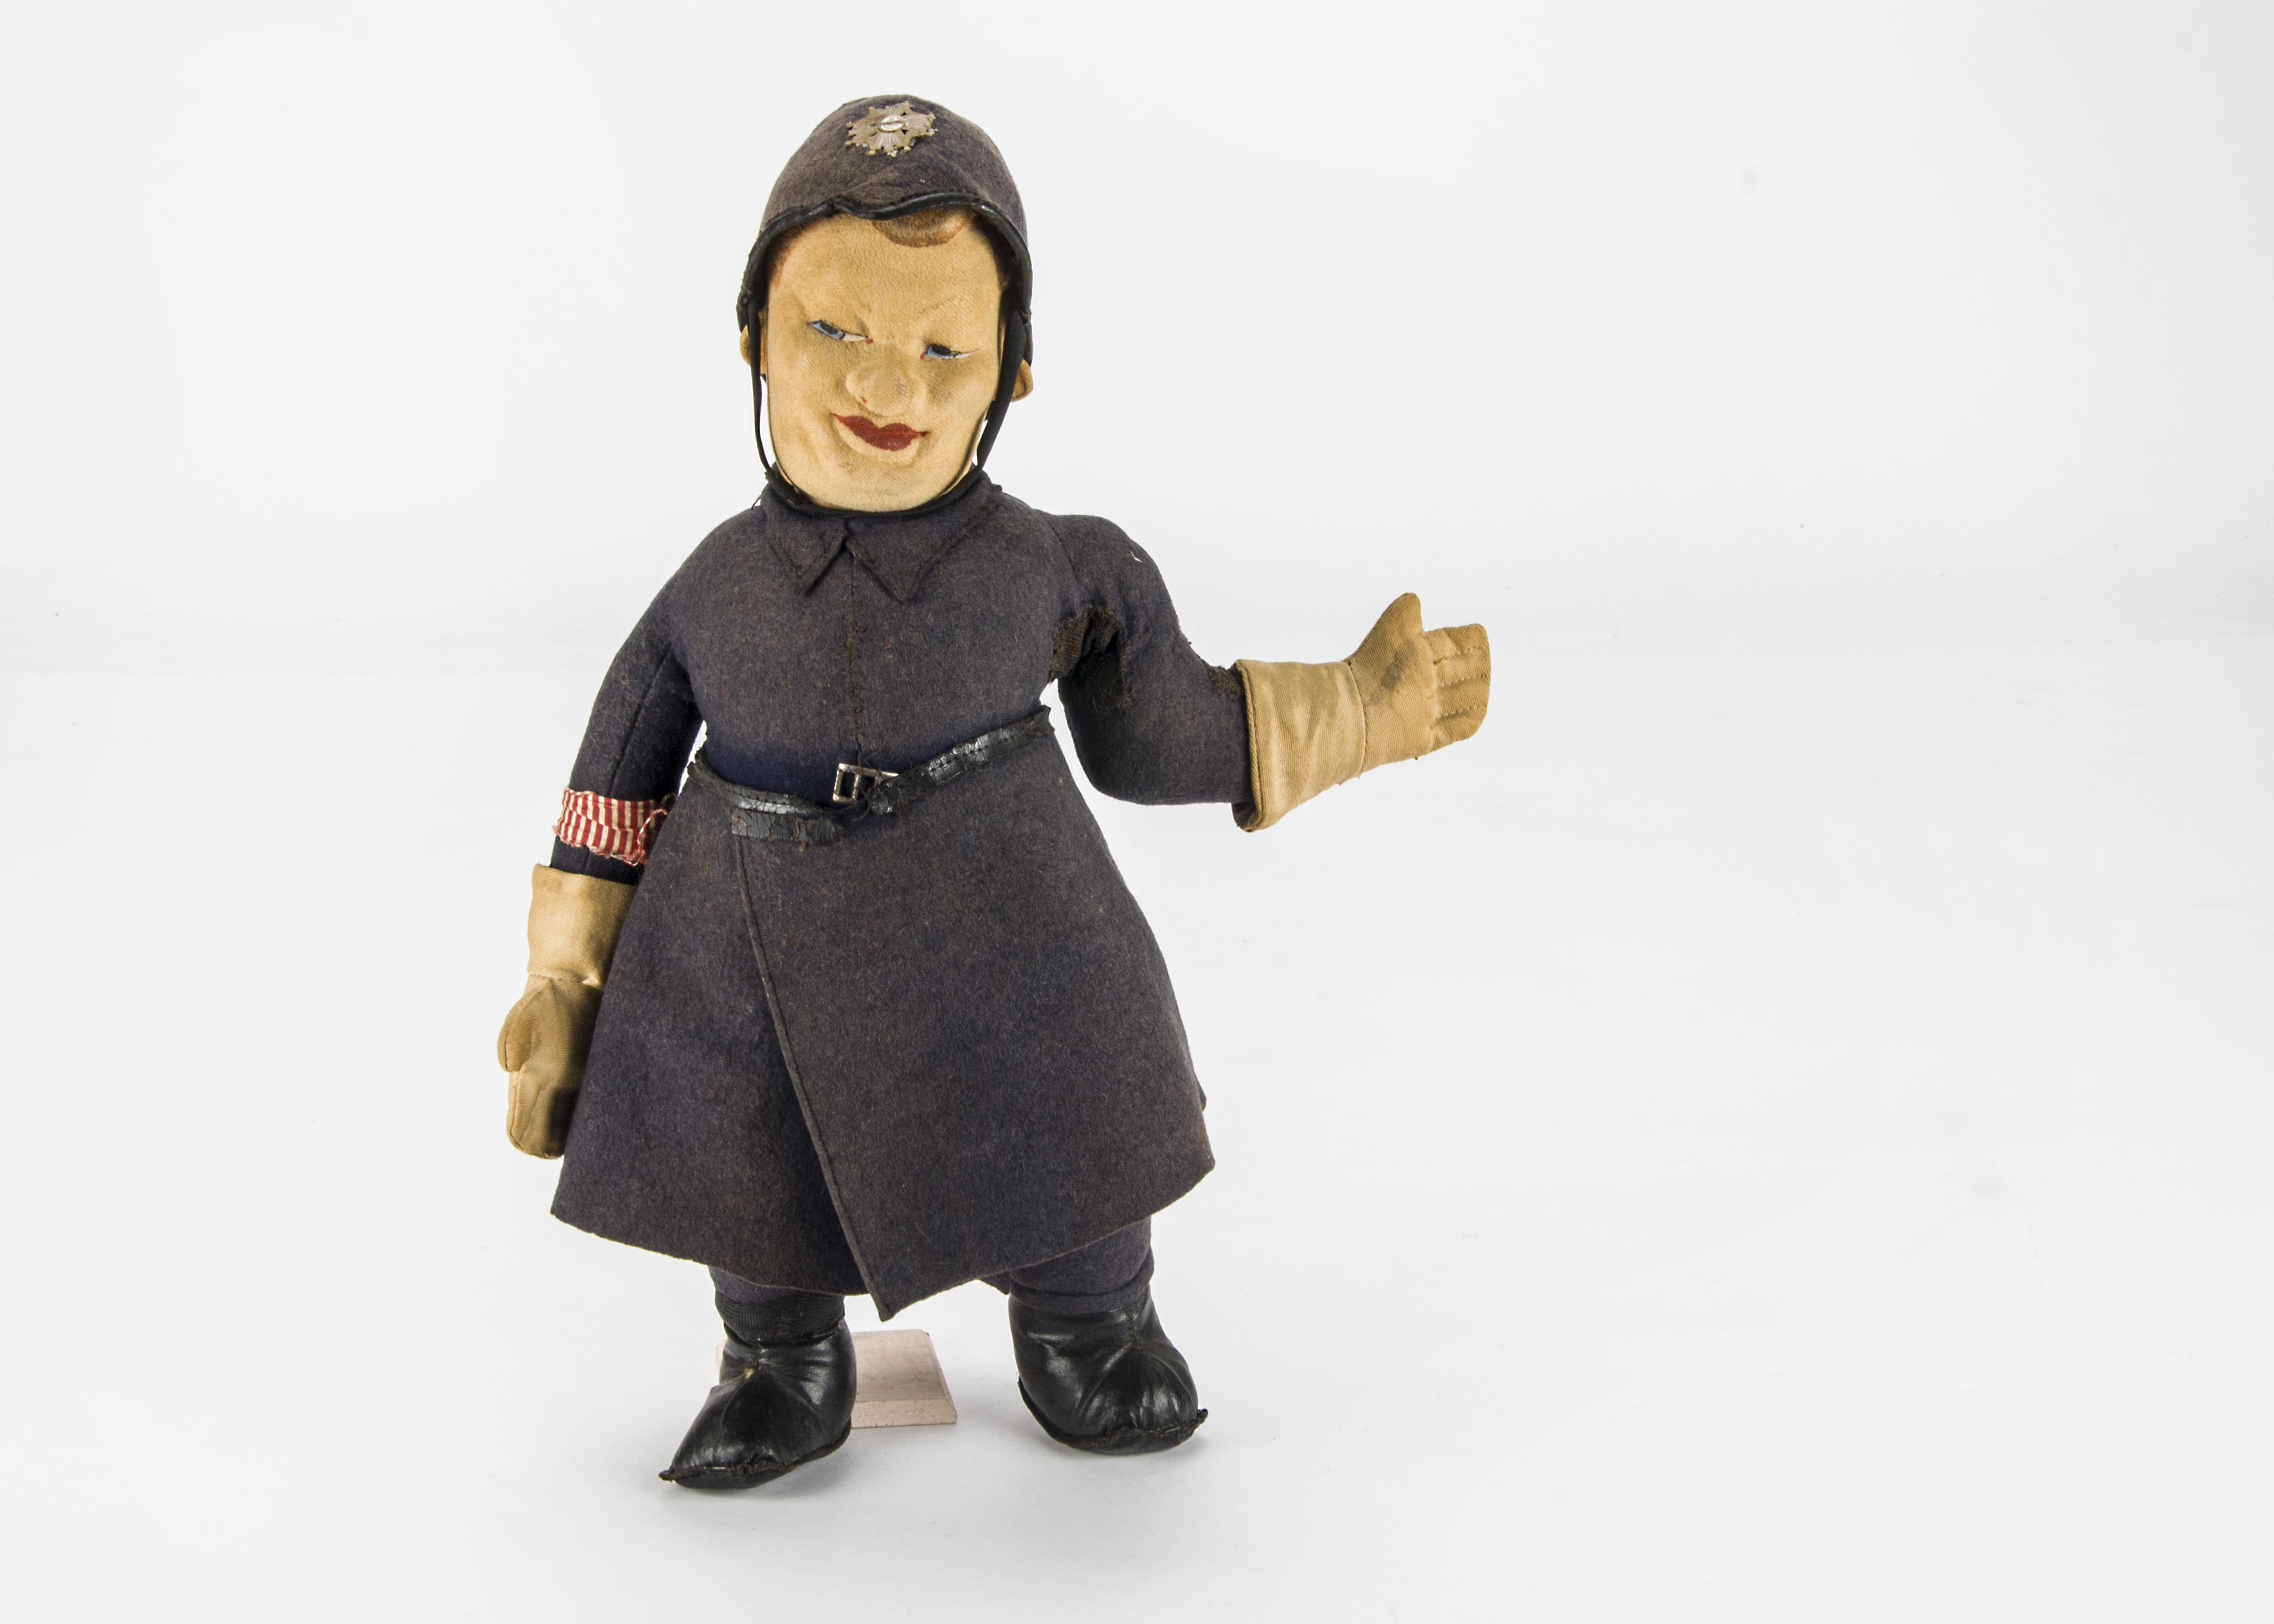 An Allwin British traffic policeman cloth doll 1930s, with press brushed cotton face, felt